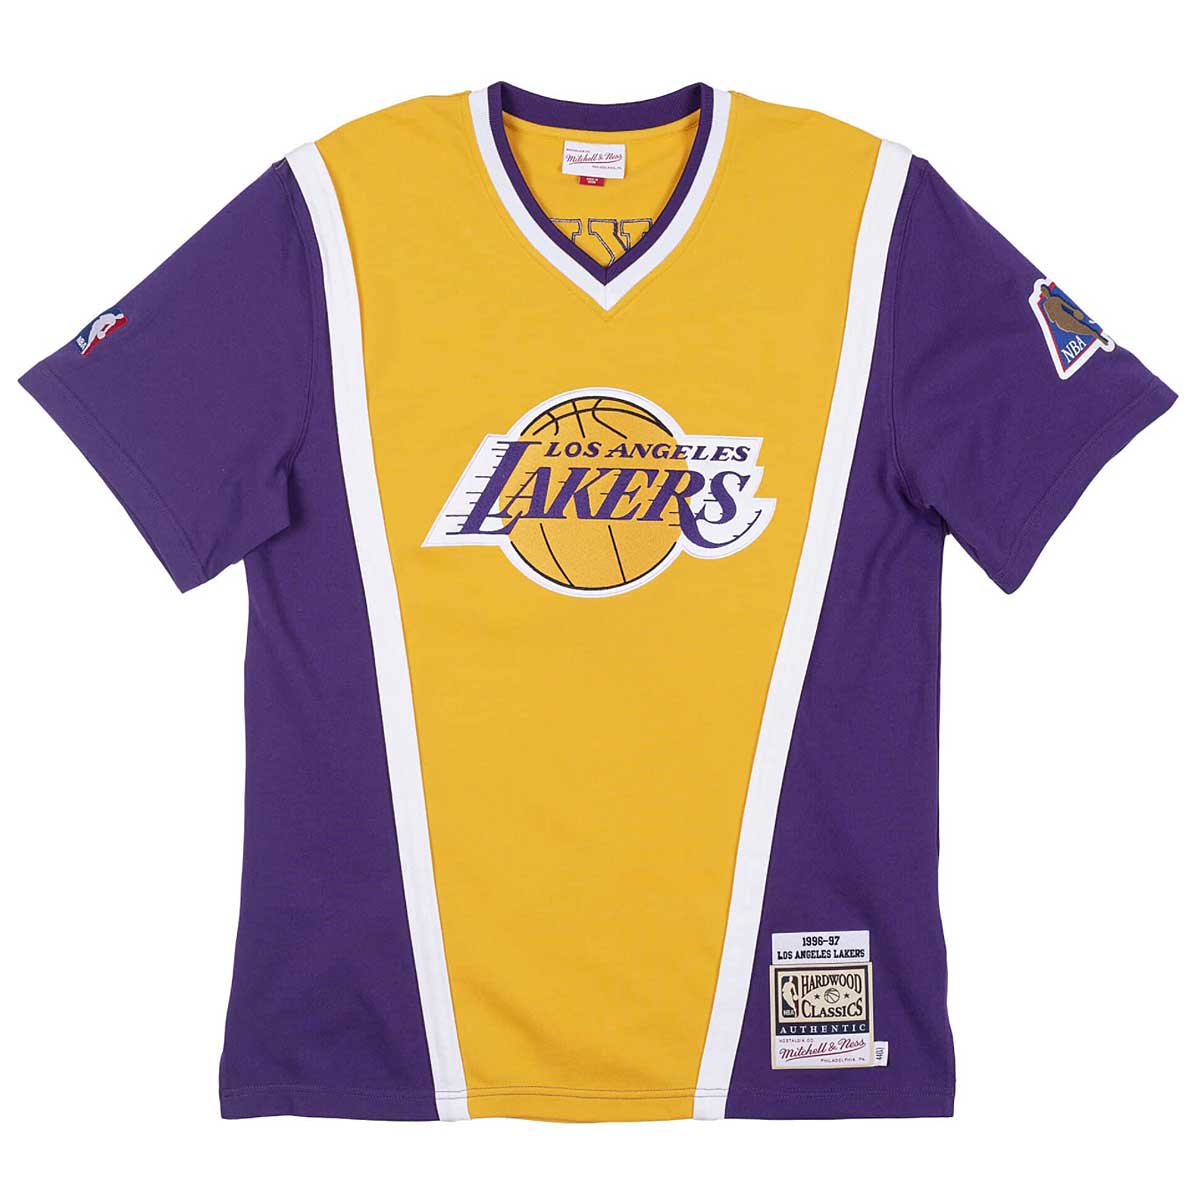 Mitchell And Ness Nba Authentic Shooting Shirt '96-'97 La Lakers, Light Gold